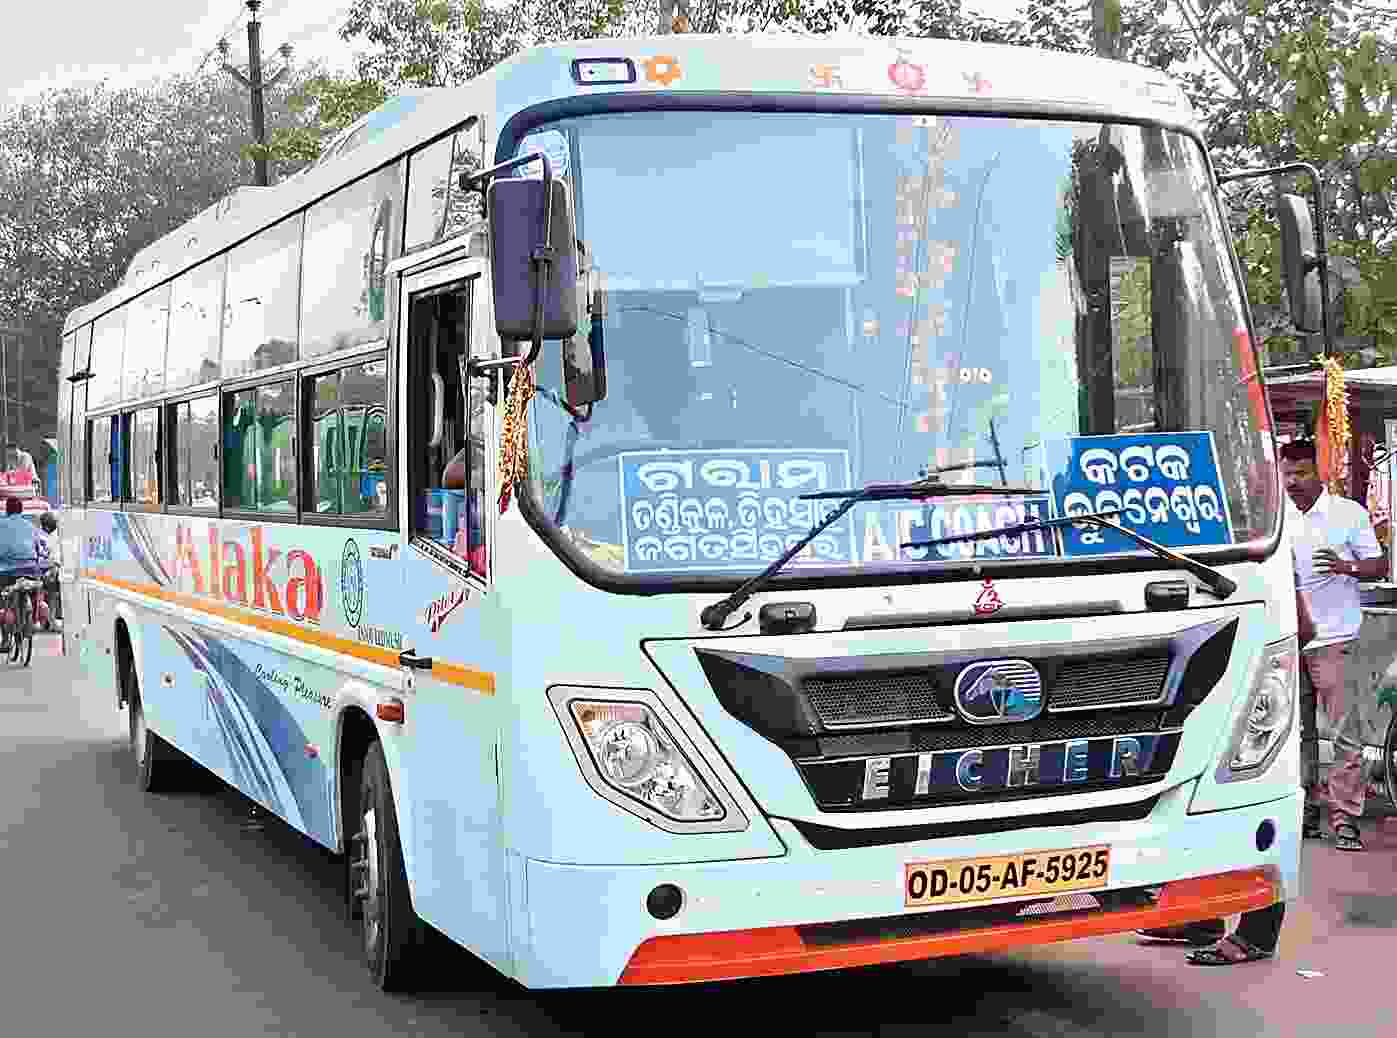 In Odisha, if female passengers board the bus first, it is considered inauspicious.